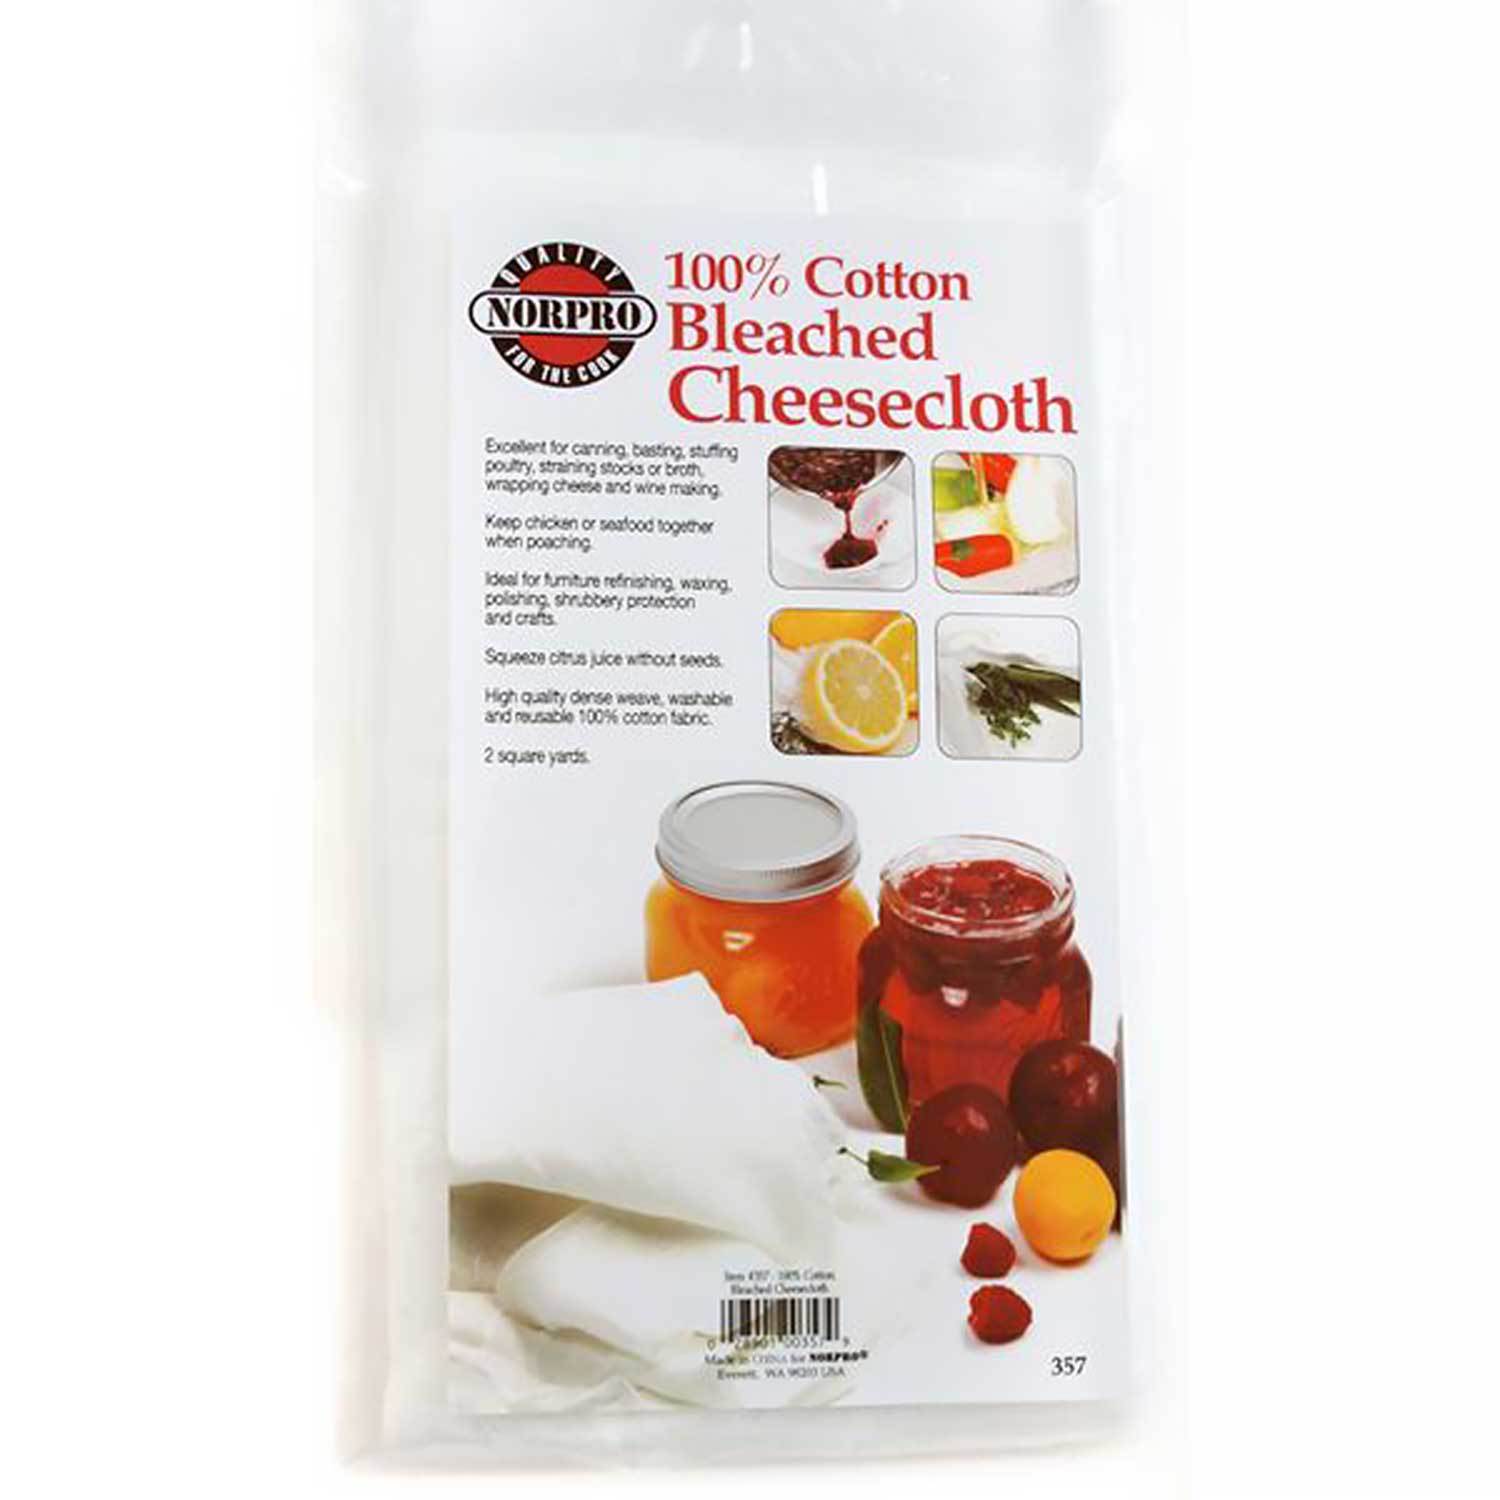 Cheesecloth-100% Cotton